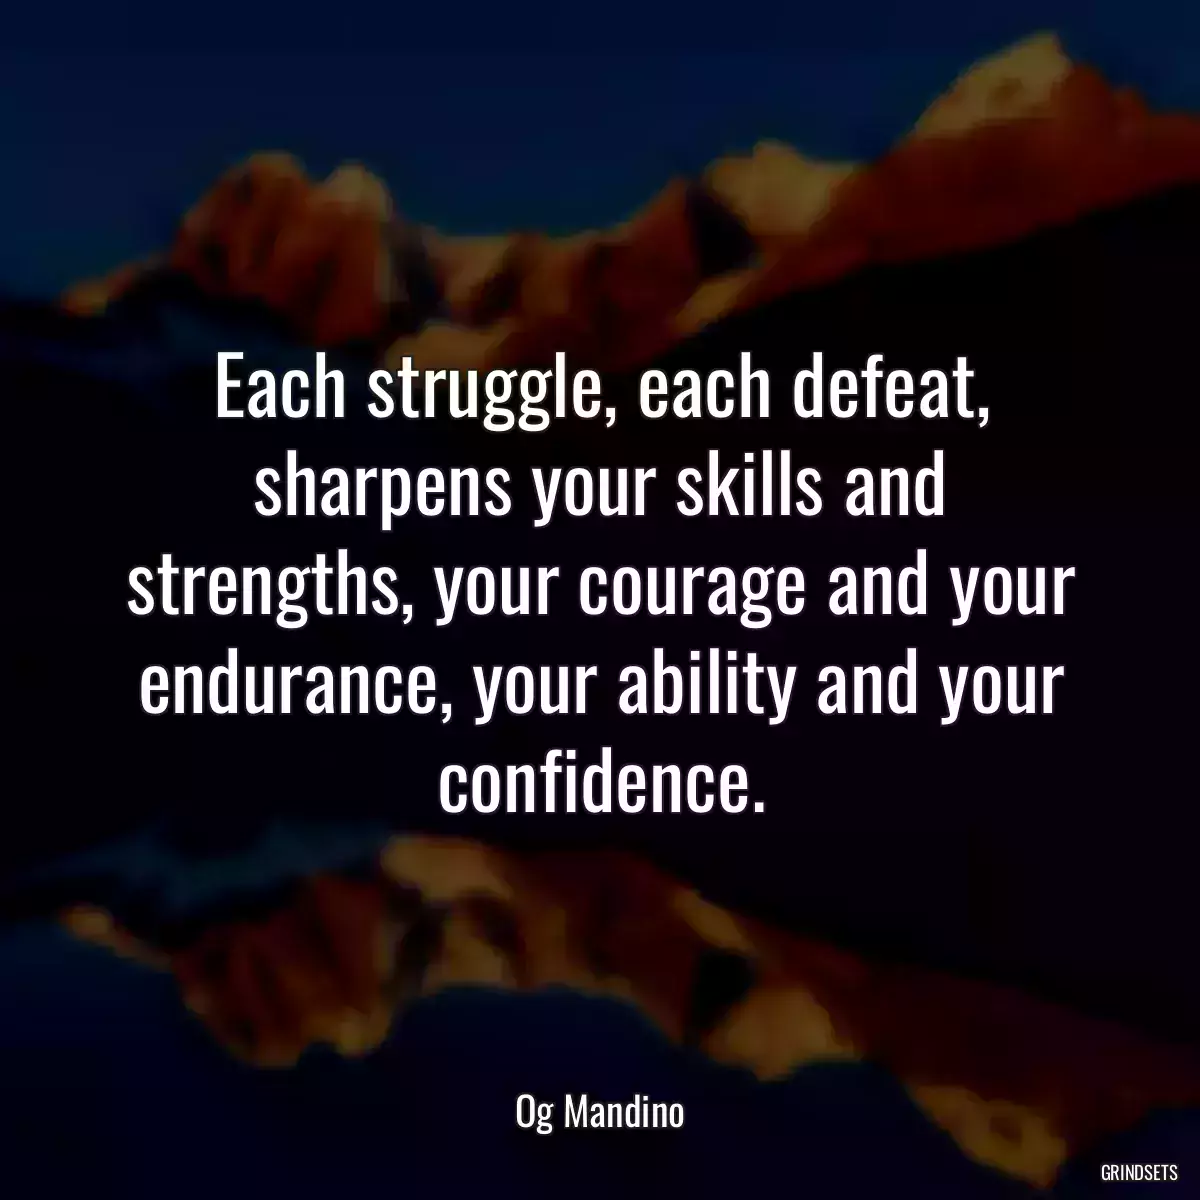 Each struggle, each defeat, sharpens your skills and strengths, your courage and your endurance, your ability and your confidence.